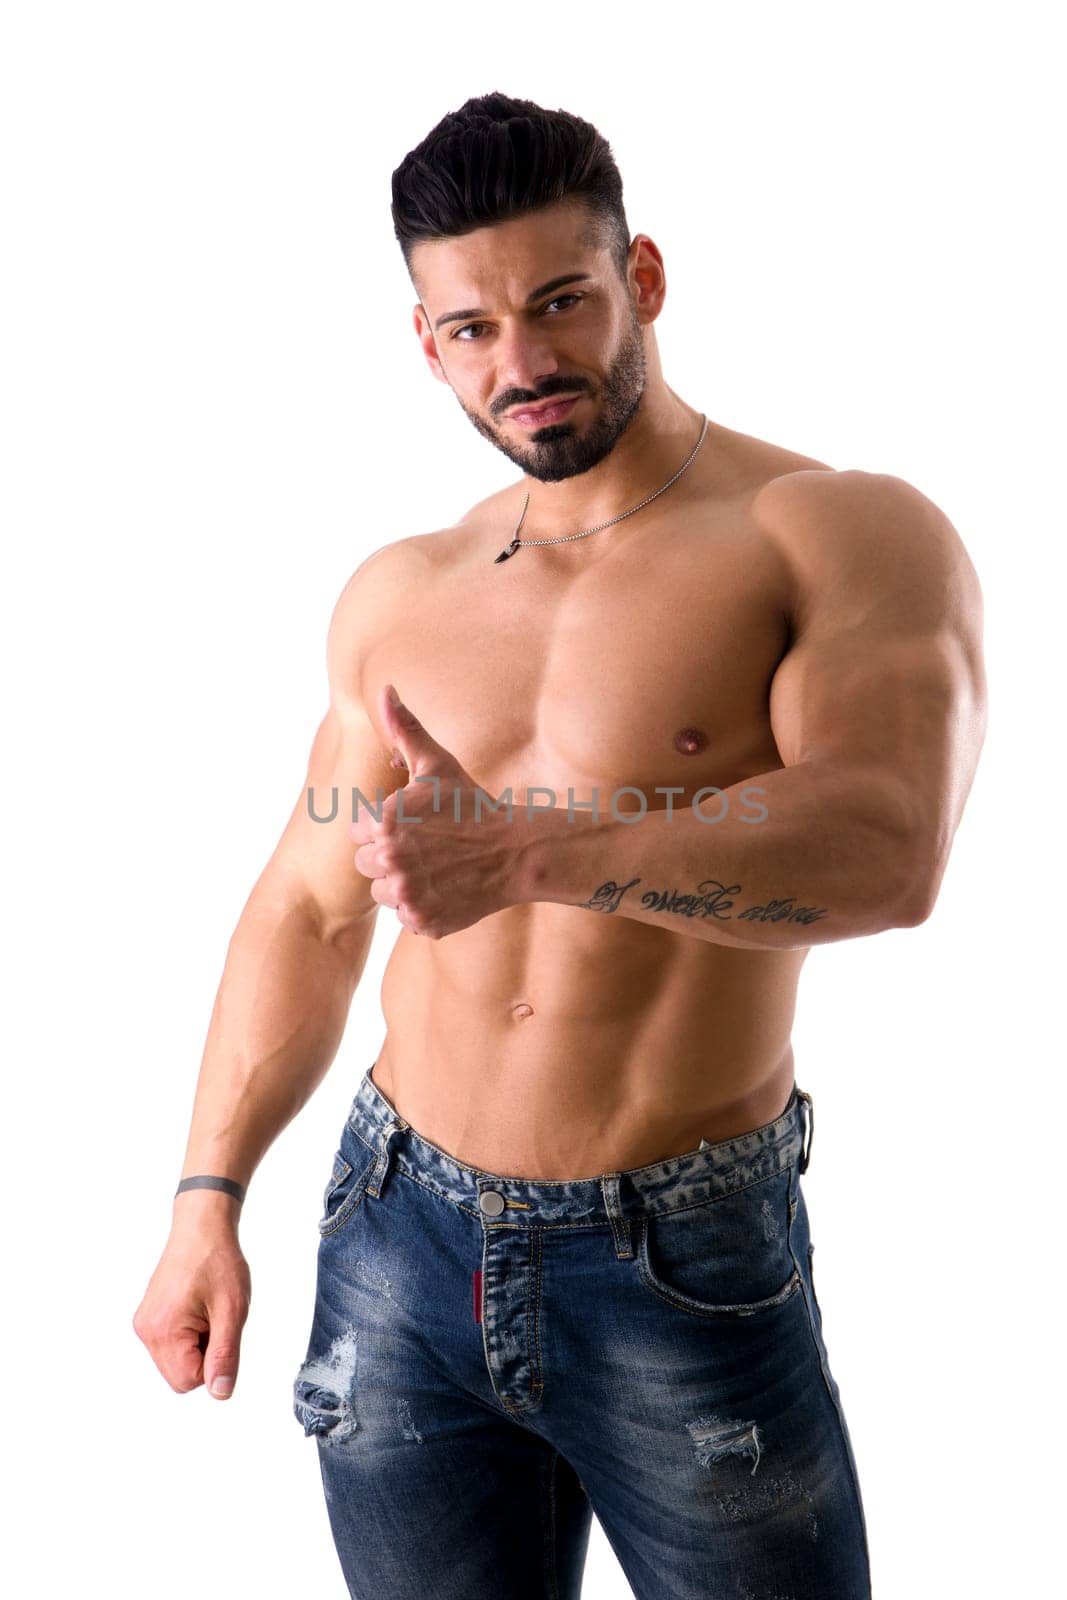 A shirtless man posing for the camera doing thumb up sign, isolated on white in studio shot